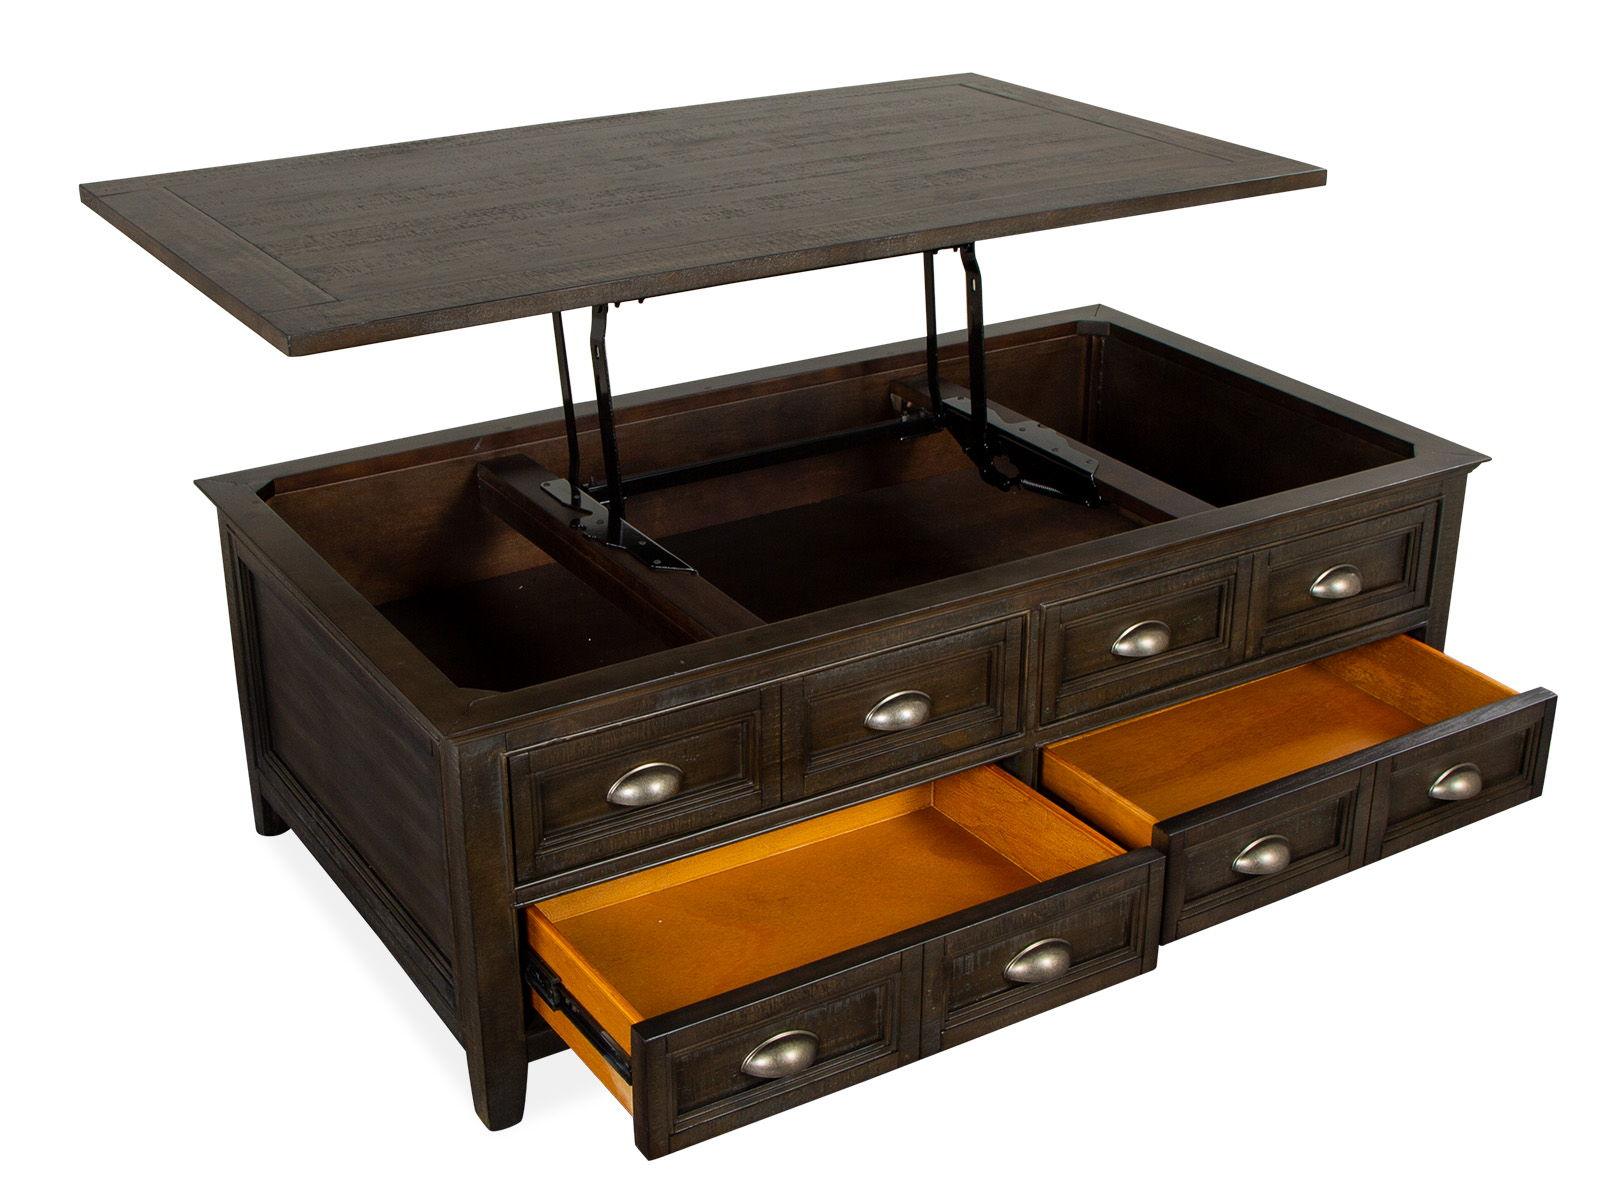 Magnussen Furniture - Westley Falls - Lift Top Storage Cocktail Table With Casters - Graphite - 5th Avenue Furniture